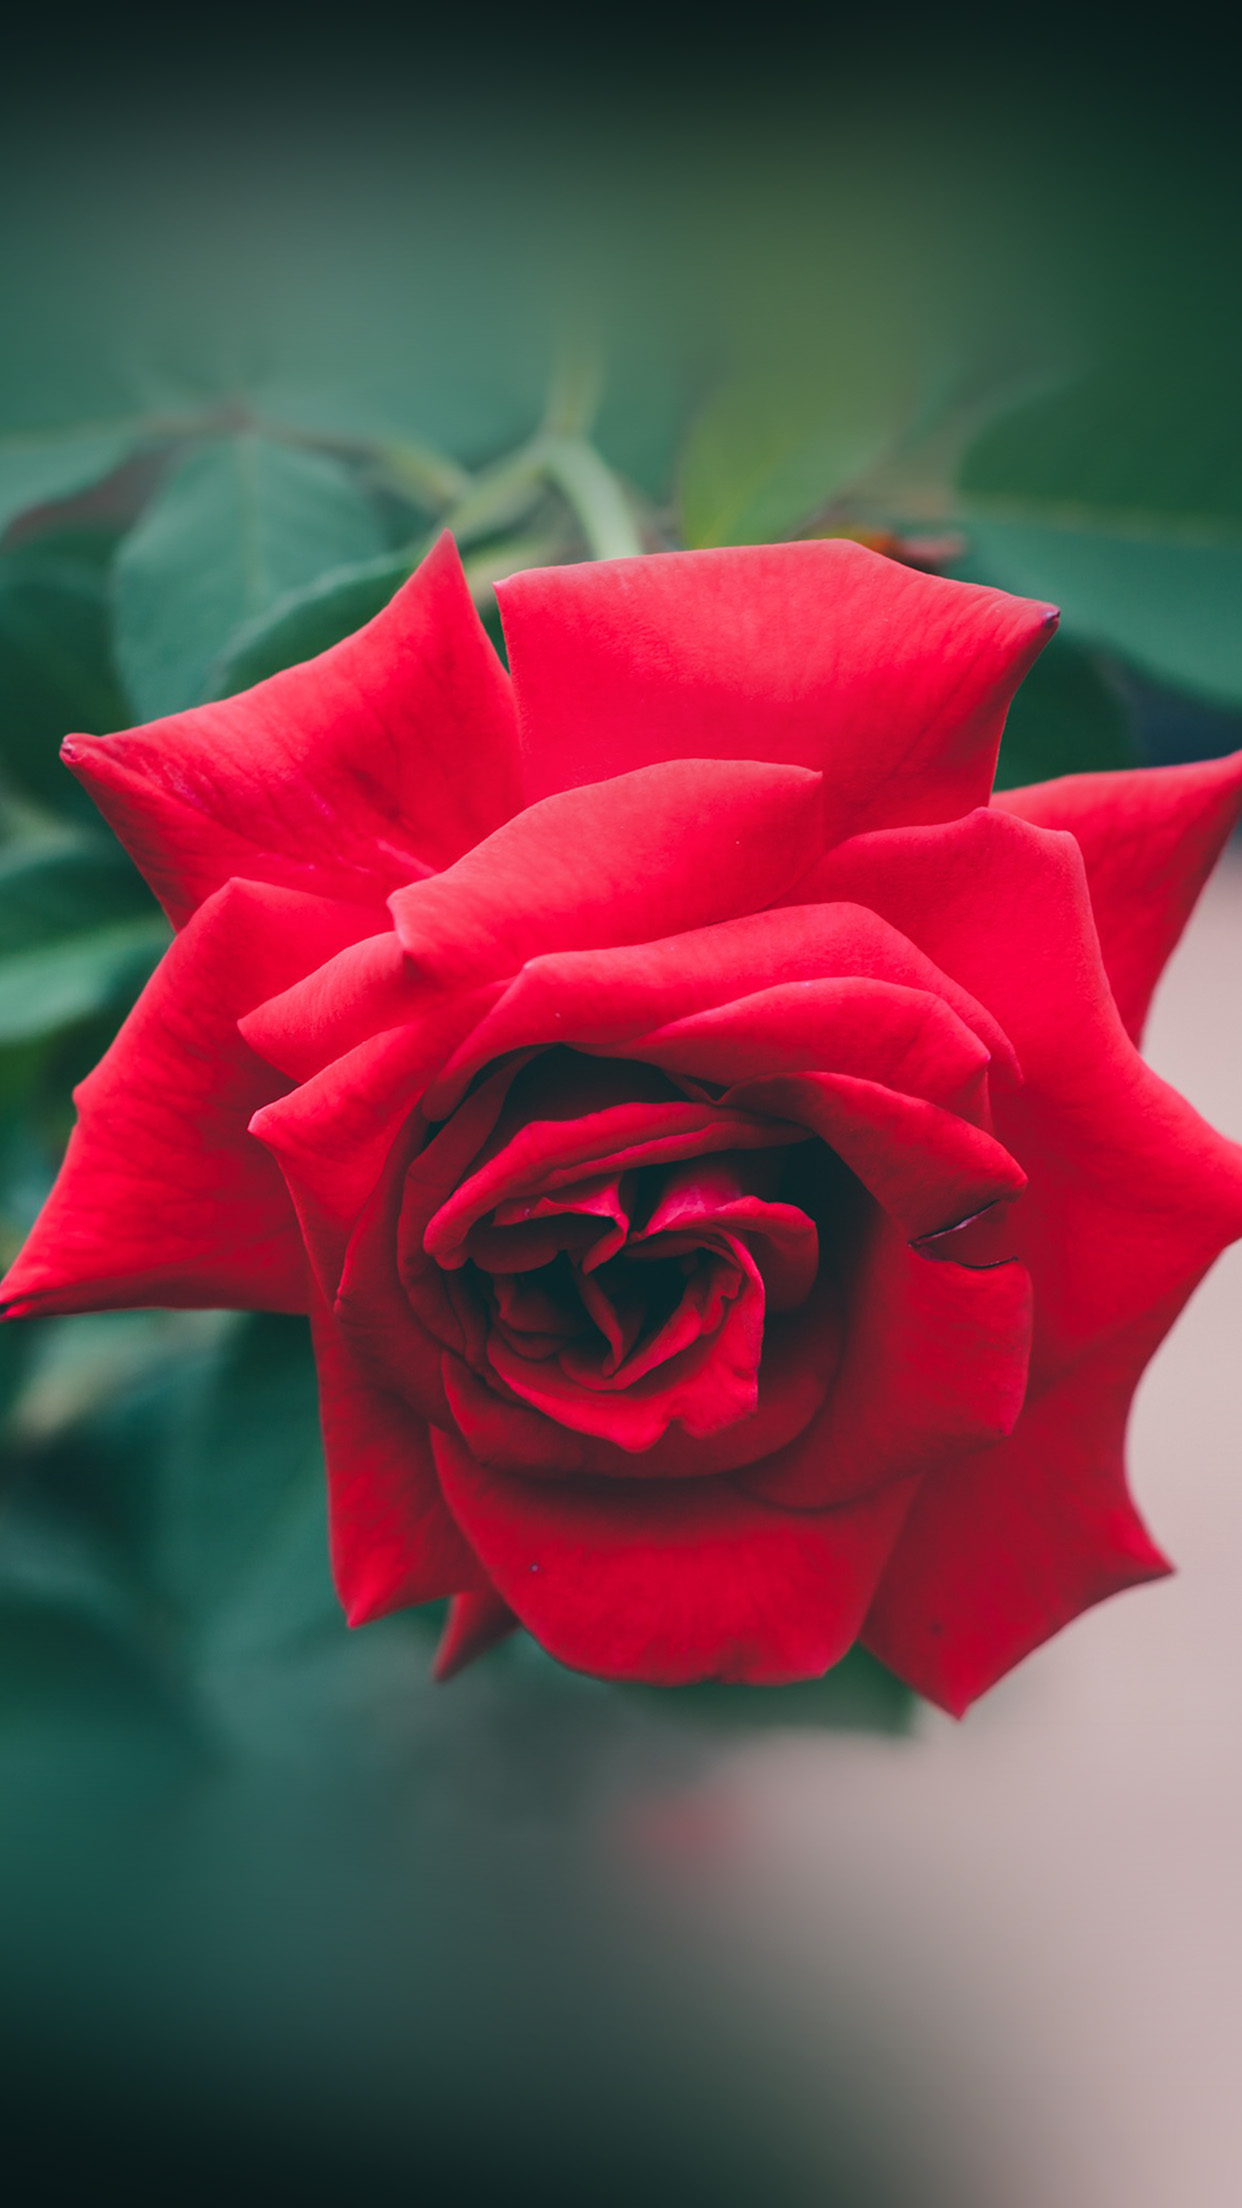 Red Rose Nature Flower Wood Love Valentine Android Wallpaper